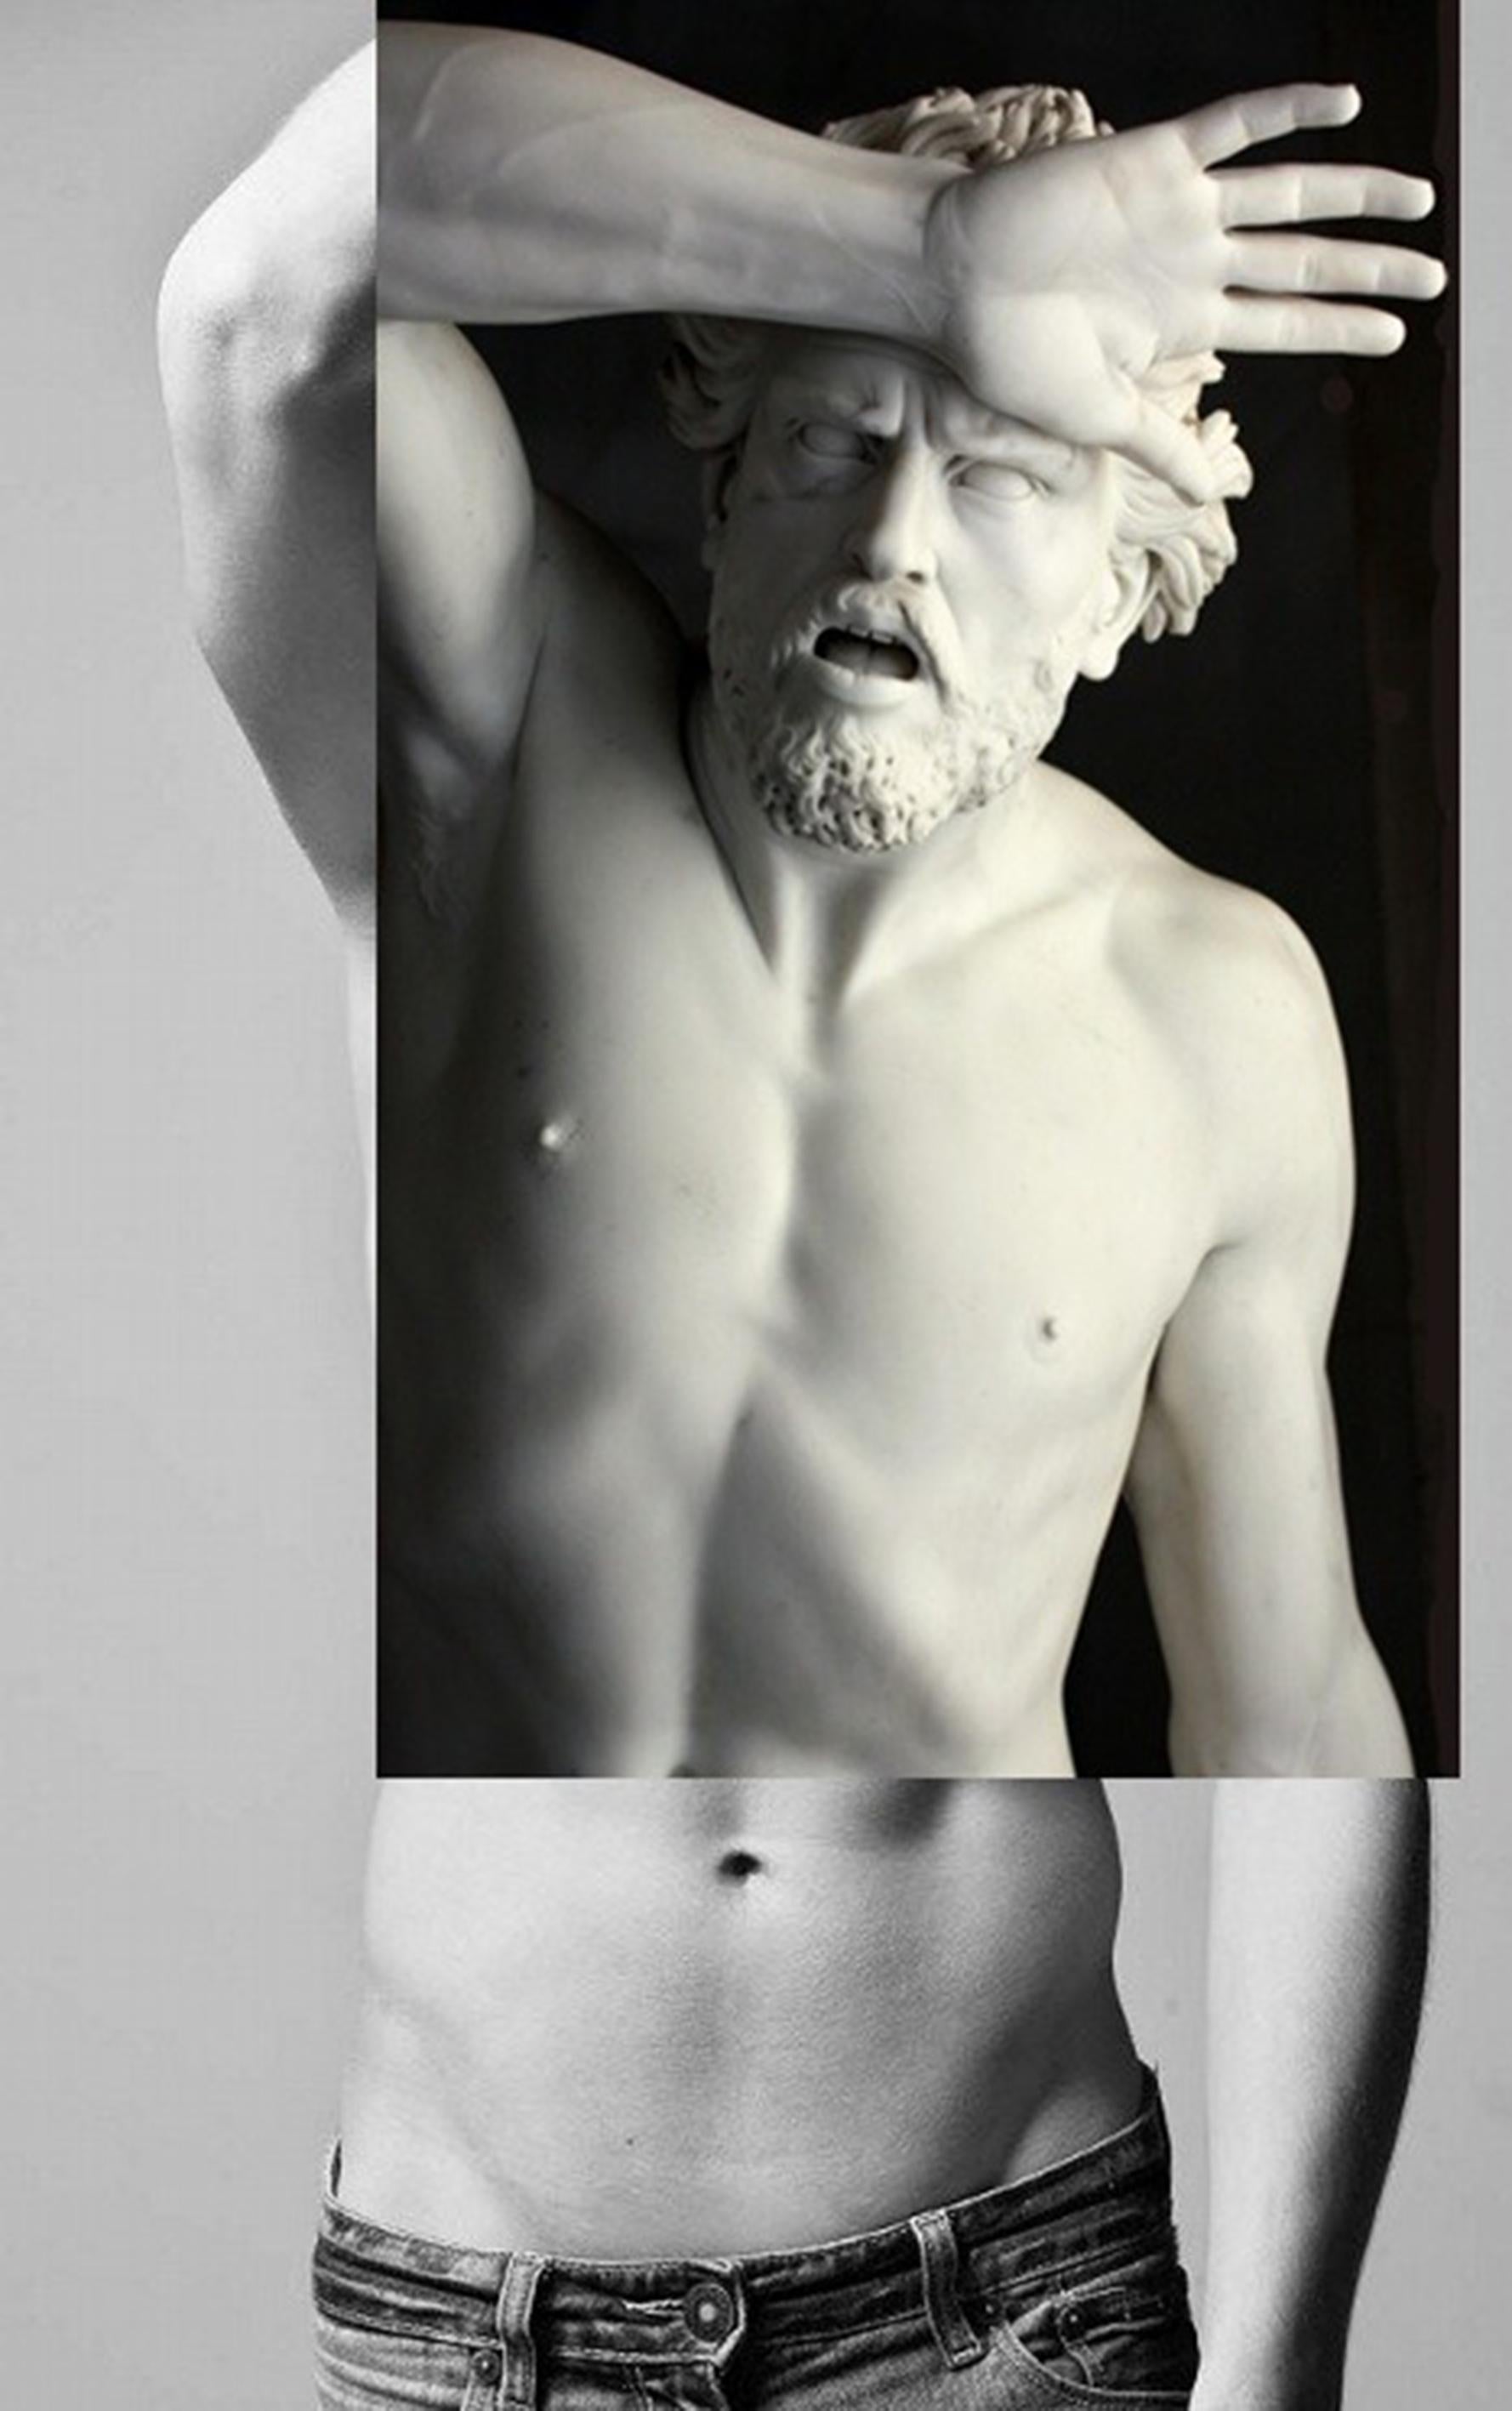 Classic sculpture + erotic themed digital collage print by Spanish artist Naro Pinosa, made famous in social media. Unique signed-by-artist piece. Authenticity certificated.
Print on photography papper. Glass and white lacquered wooden frame.